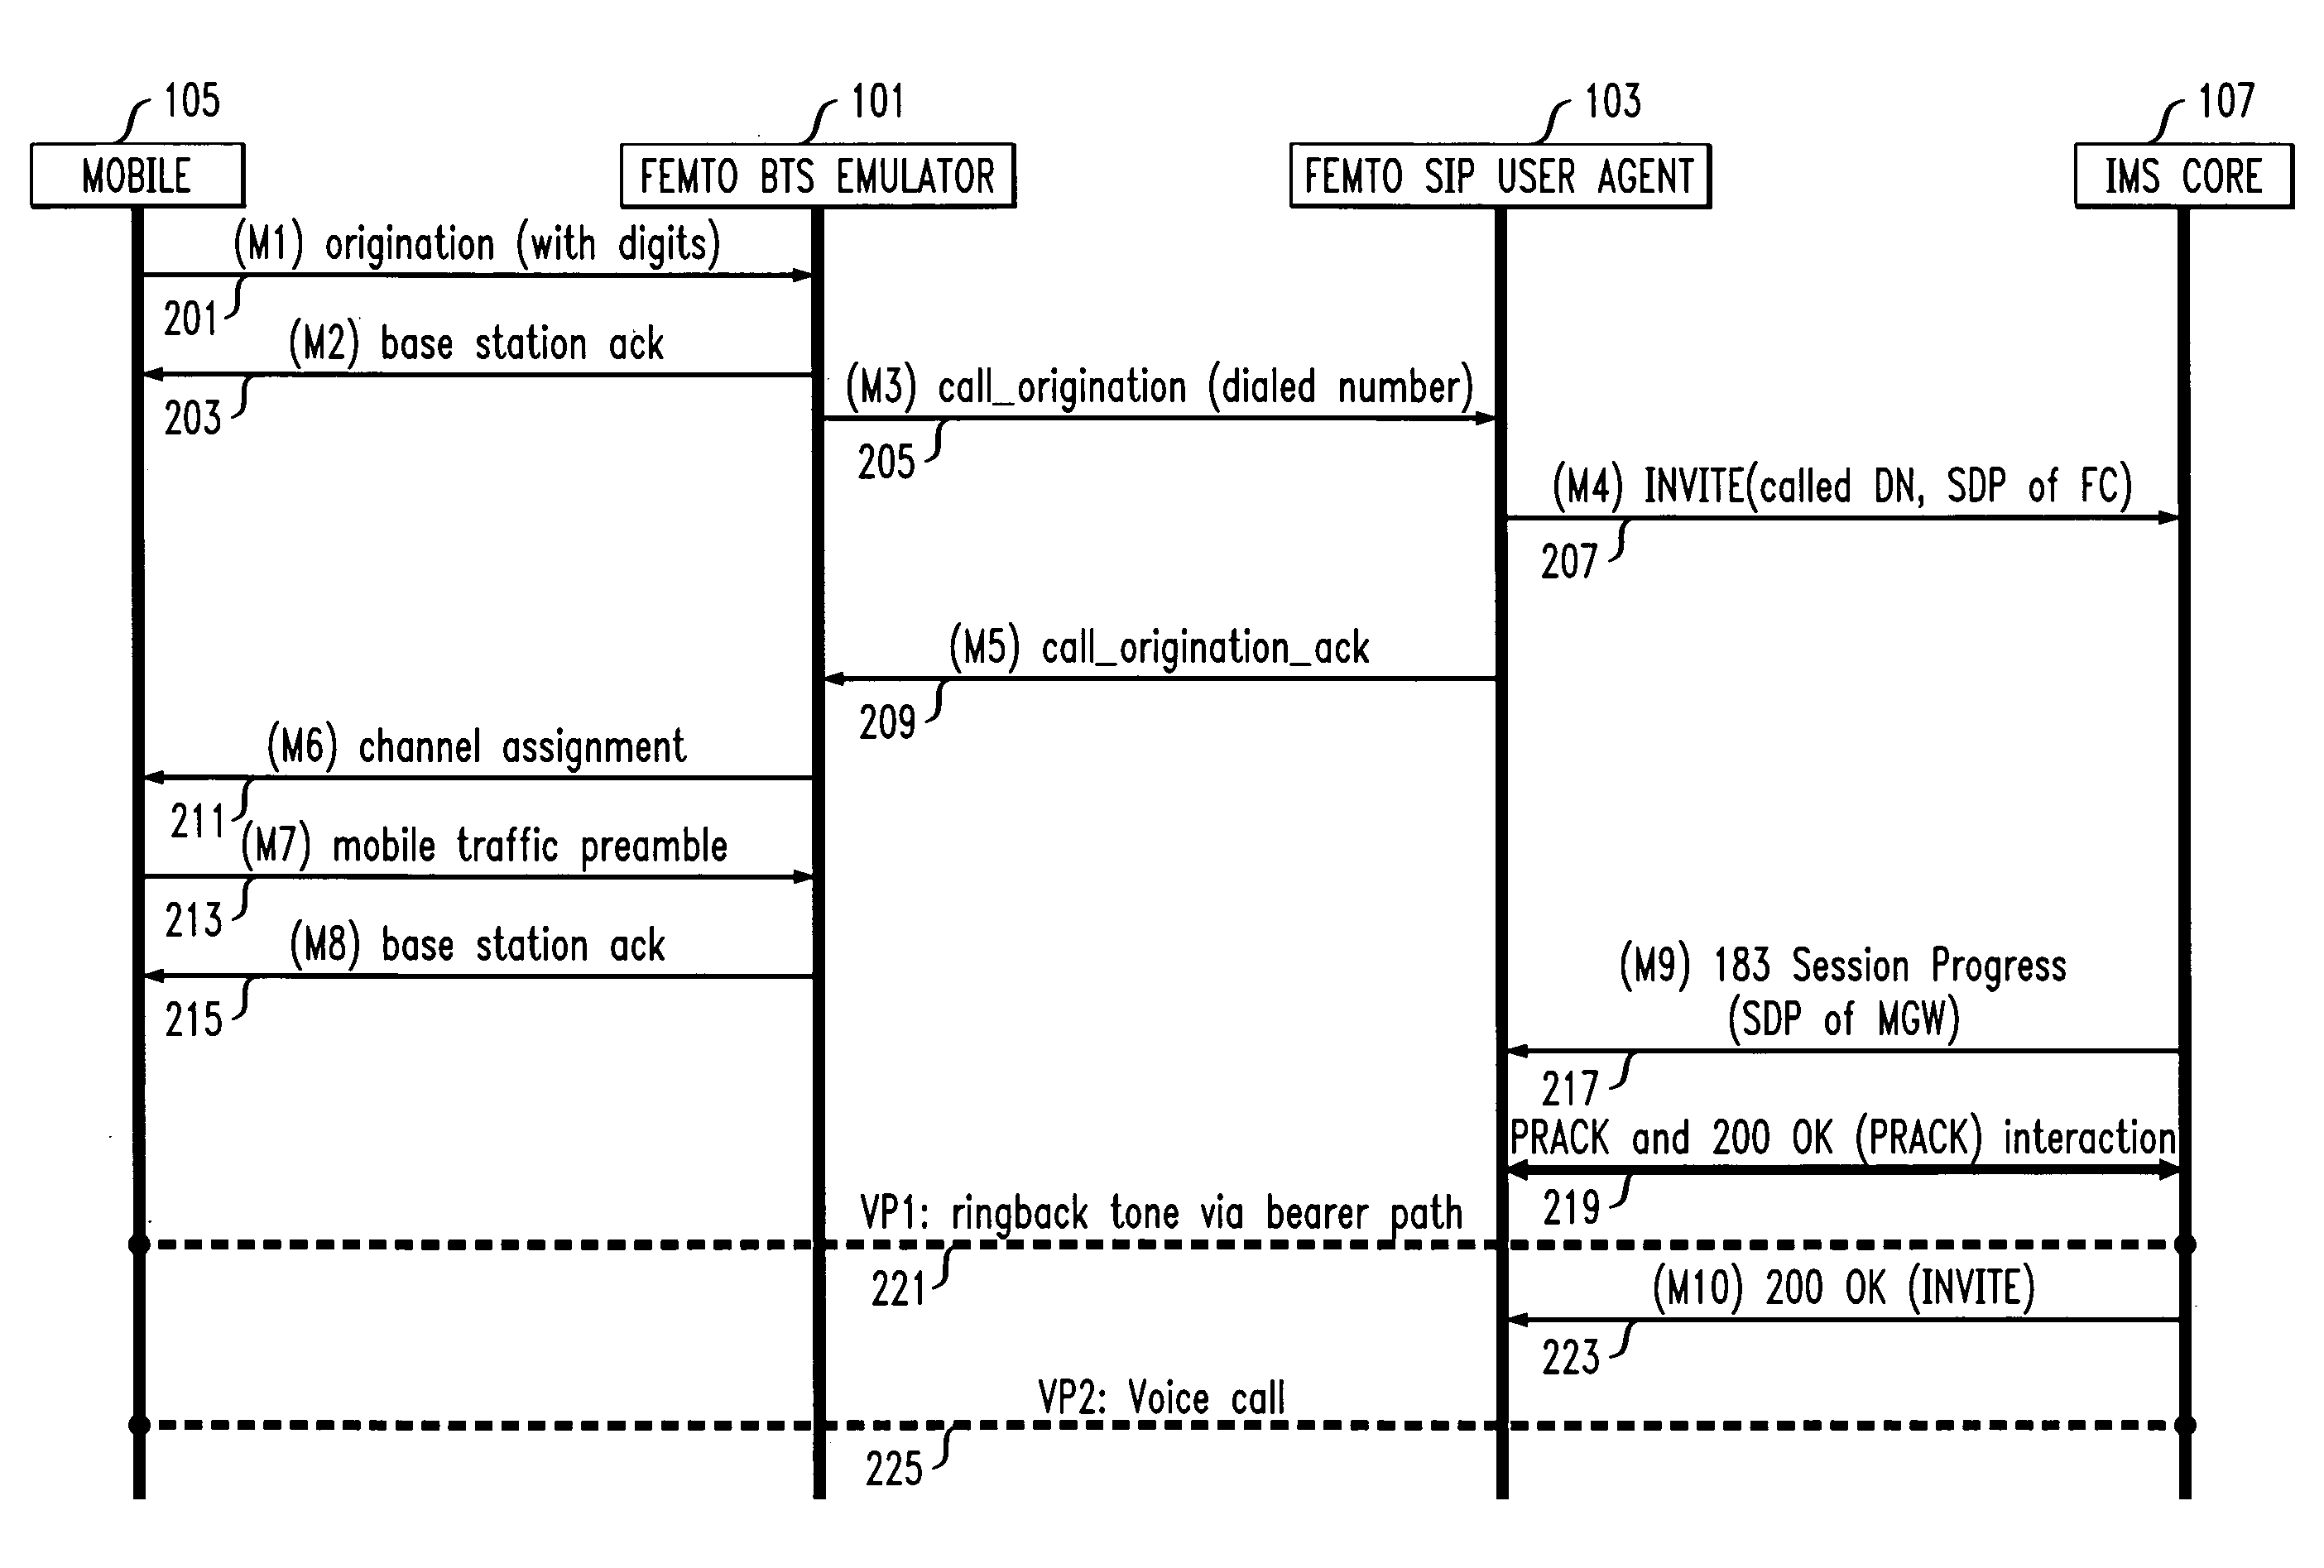 METHOD AND APPARATUS FOR SIGNALING INTERWORKING CDMA 3G1x MOBILES AND EVDO MOBILES WITH AN IMS CORE NETWORK